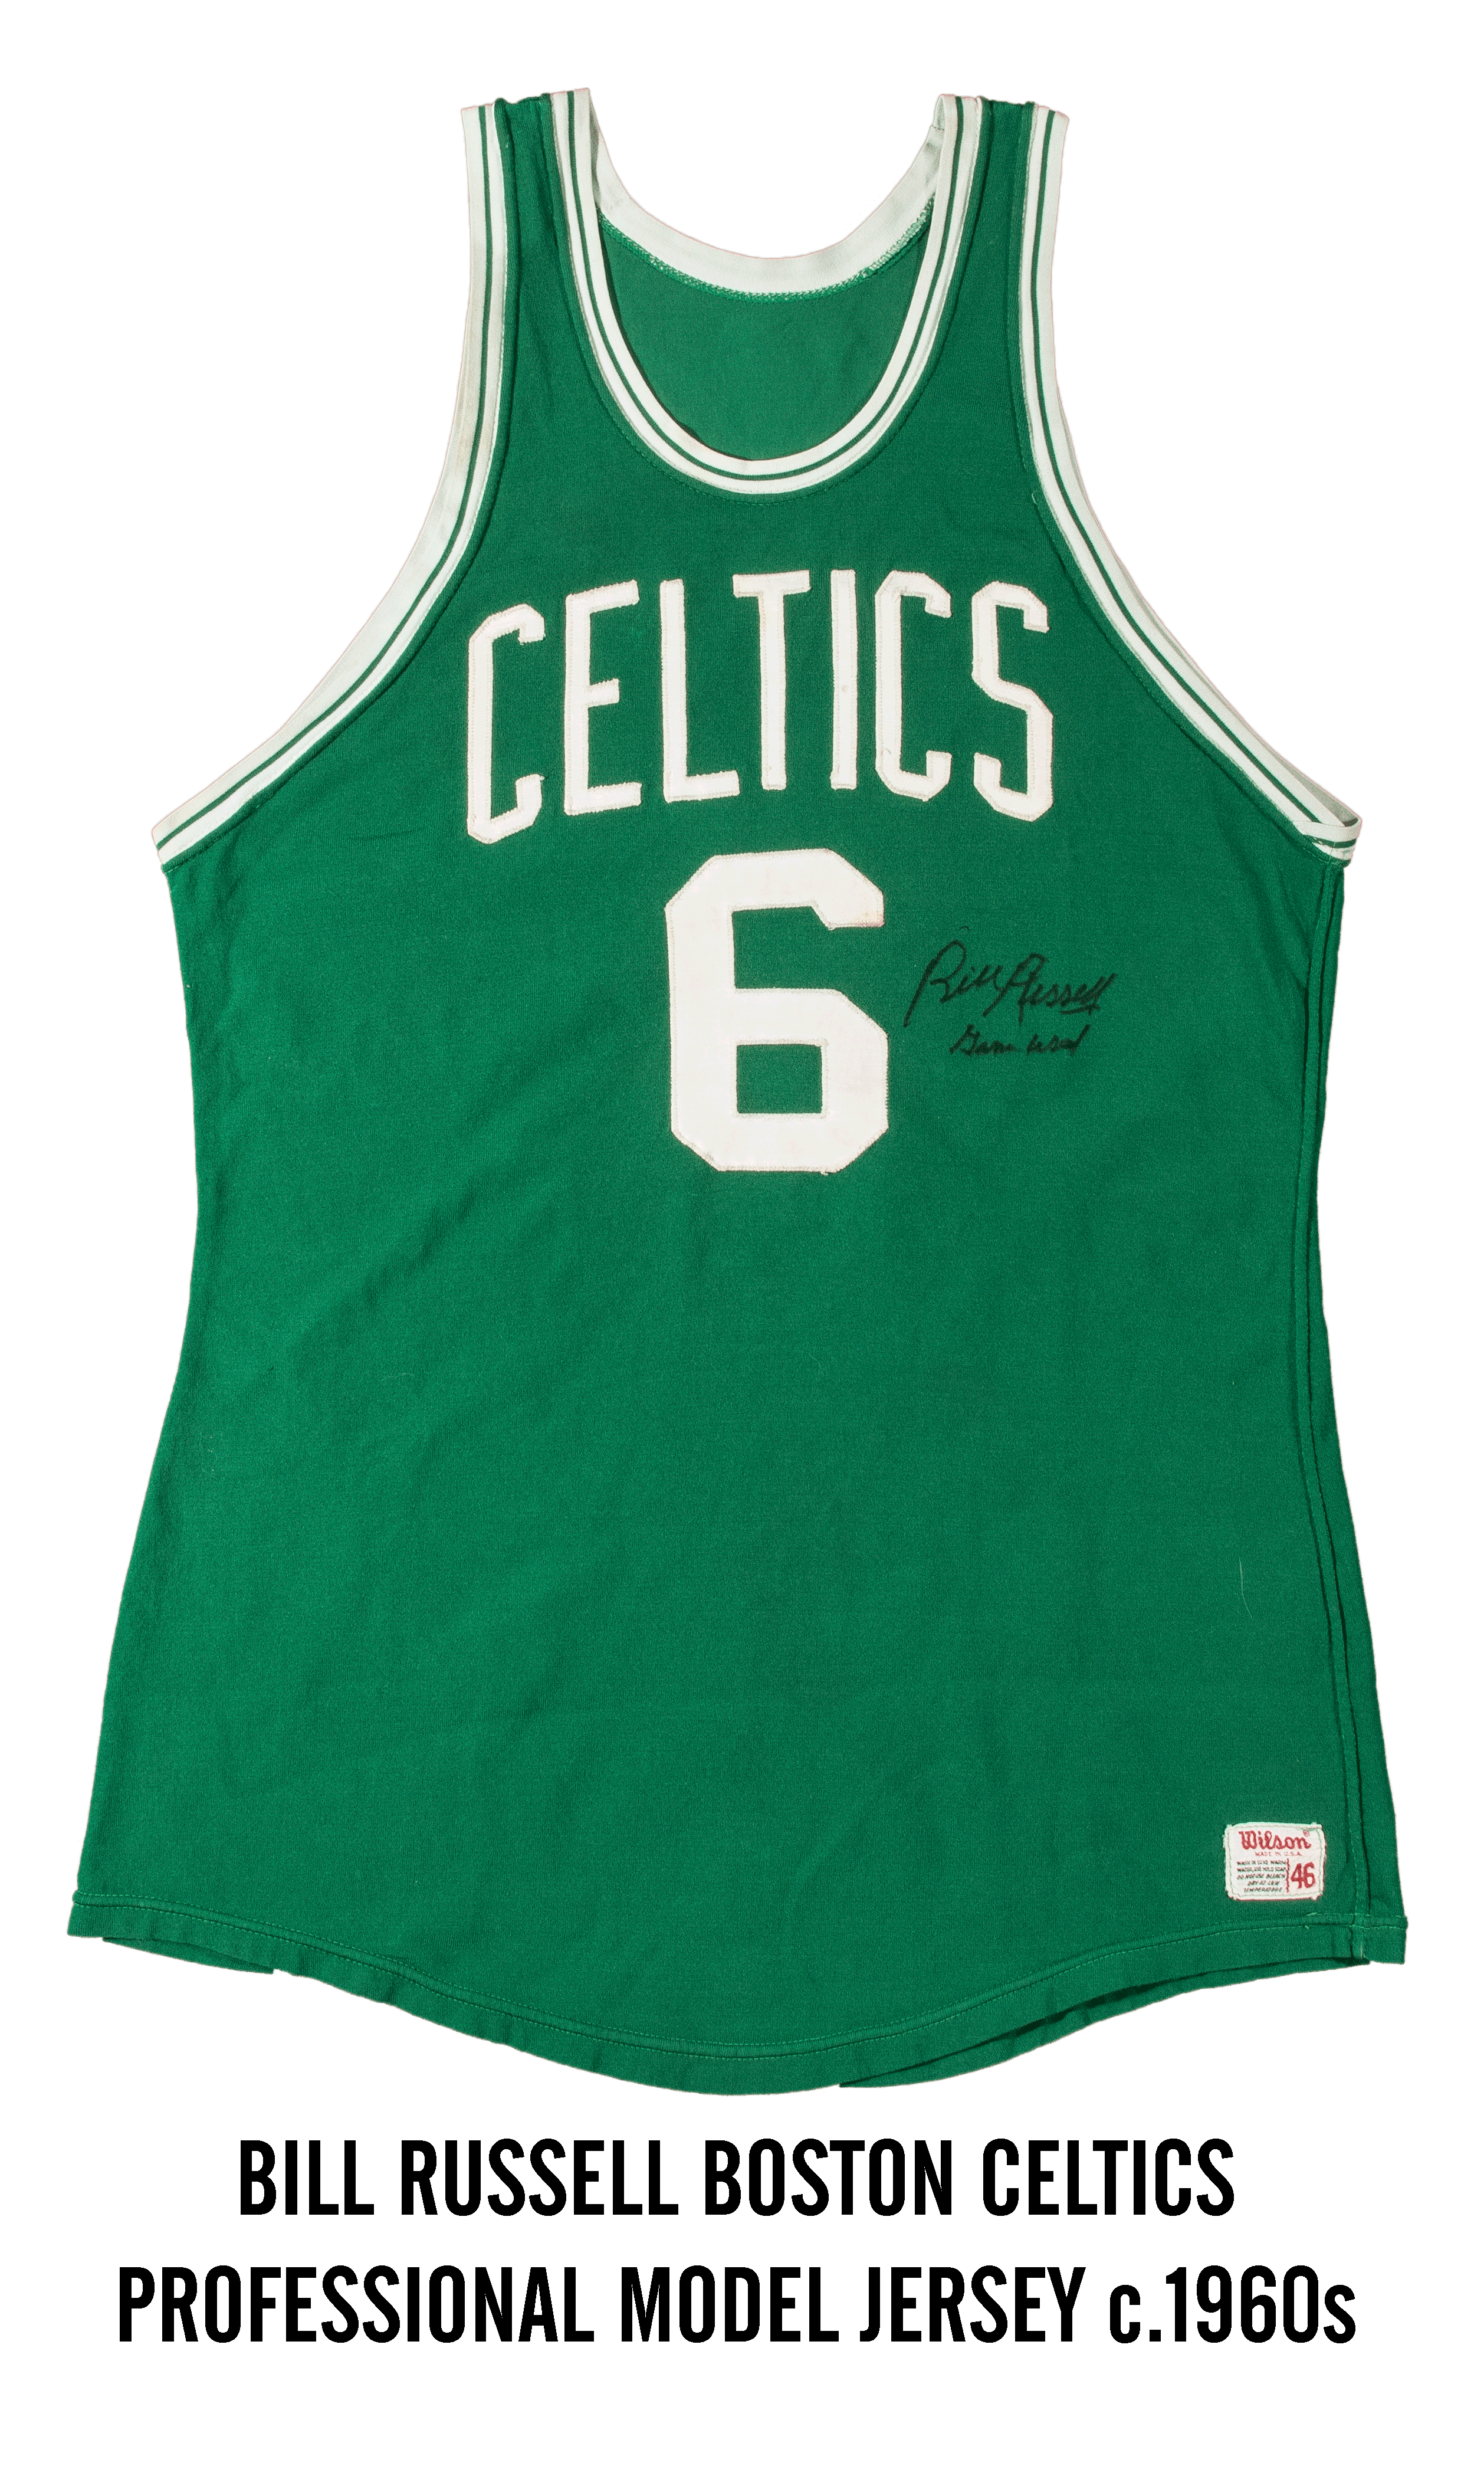 bill russell jersey for sale